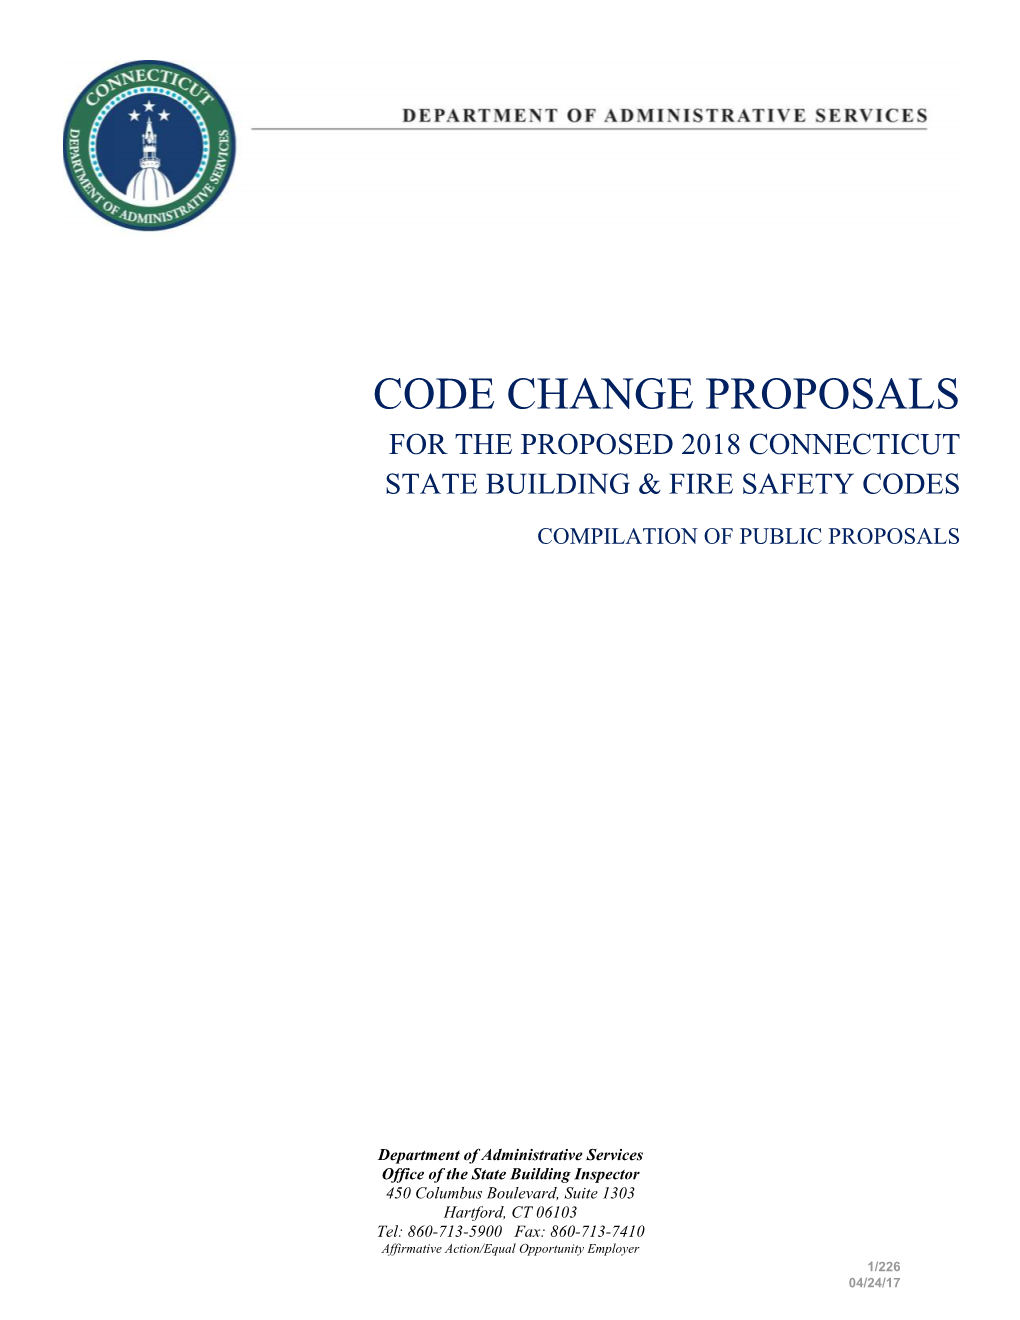 Code Change Proposals for the Proposed 2018 Connecticut State Building & Fire Safety Codes